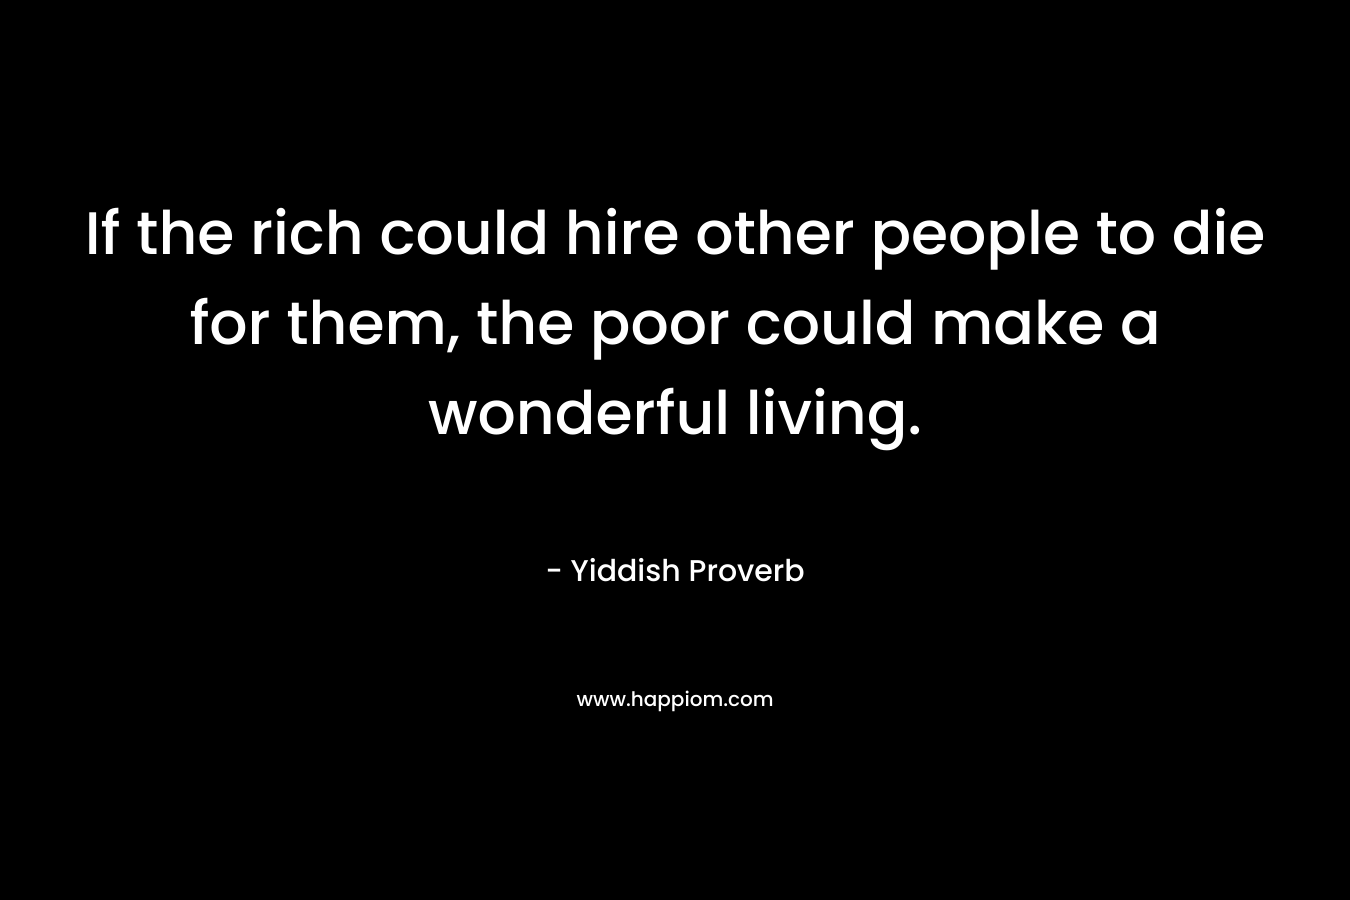 If the rich could hire other people to die for them, the poor could make a wonderful living. – Yiddish Proverb